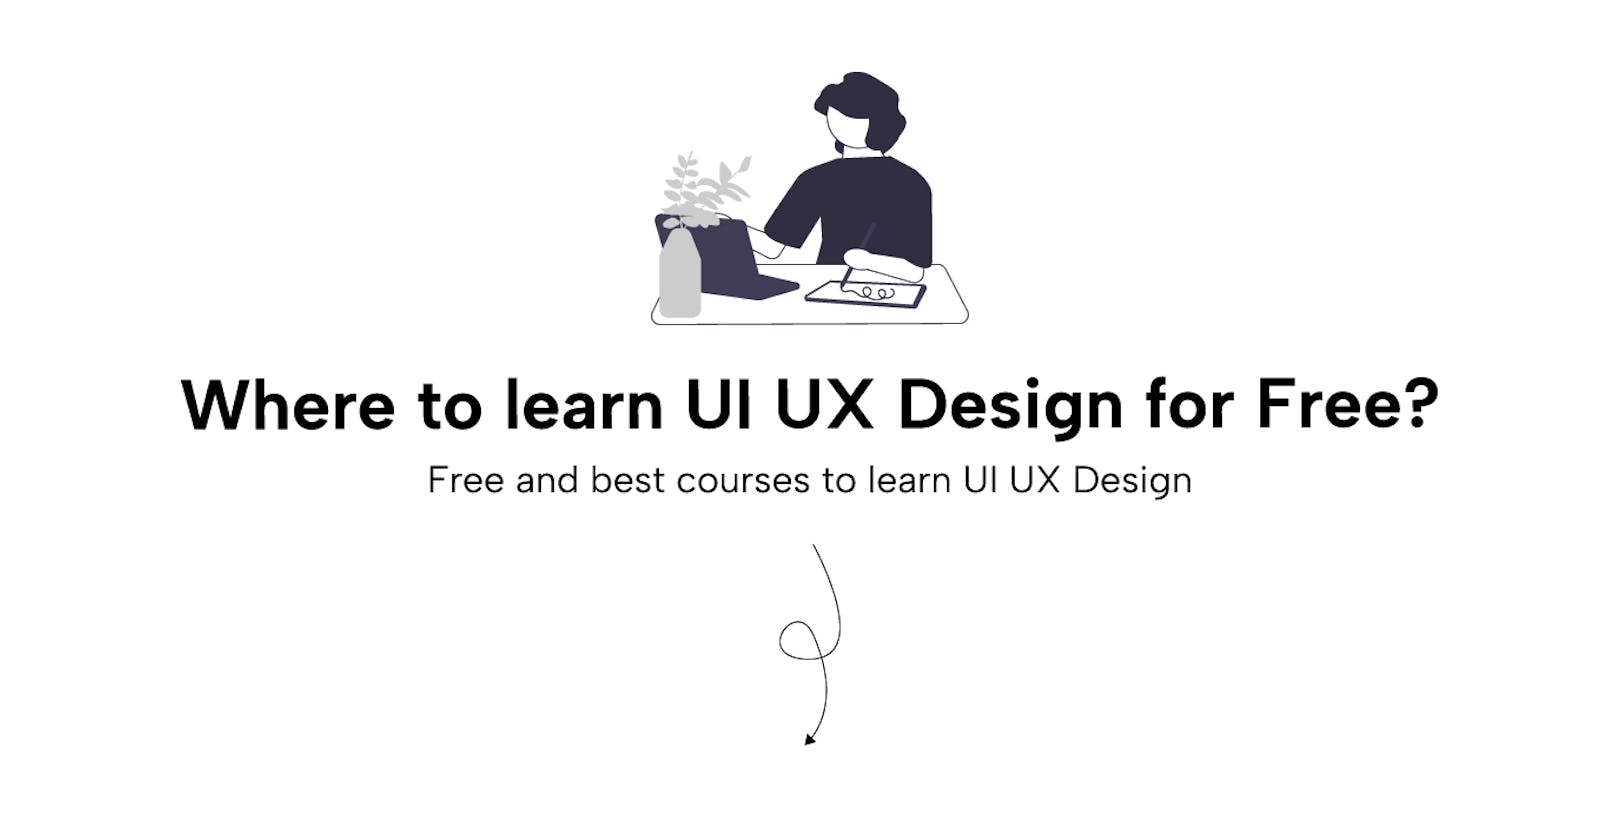 7 Free Courses to learn UI UX Design